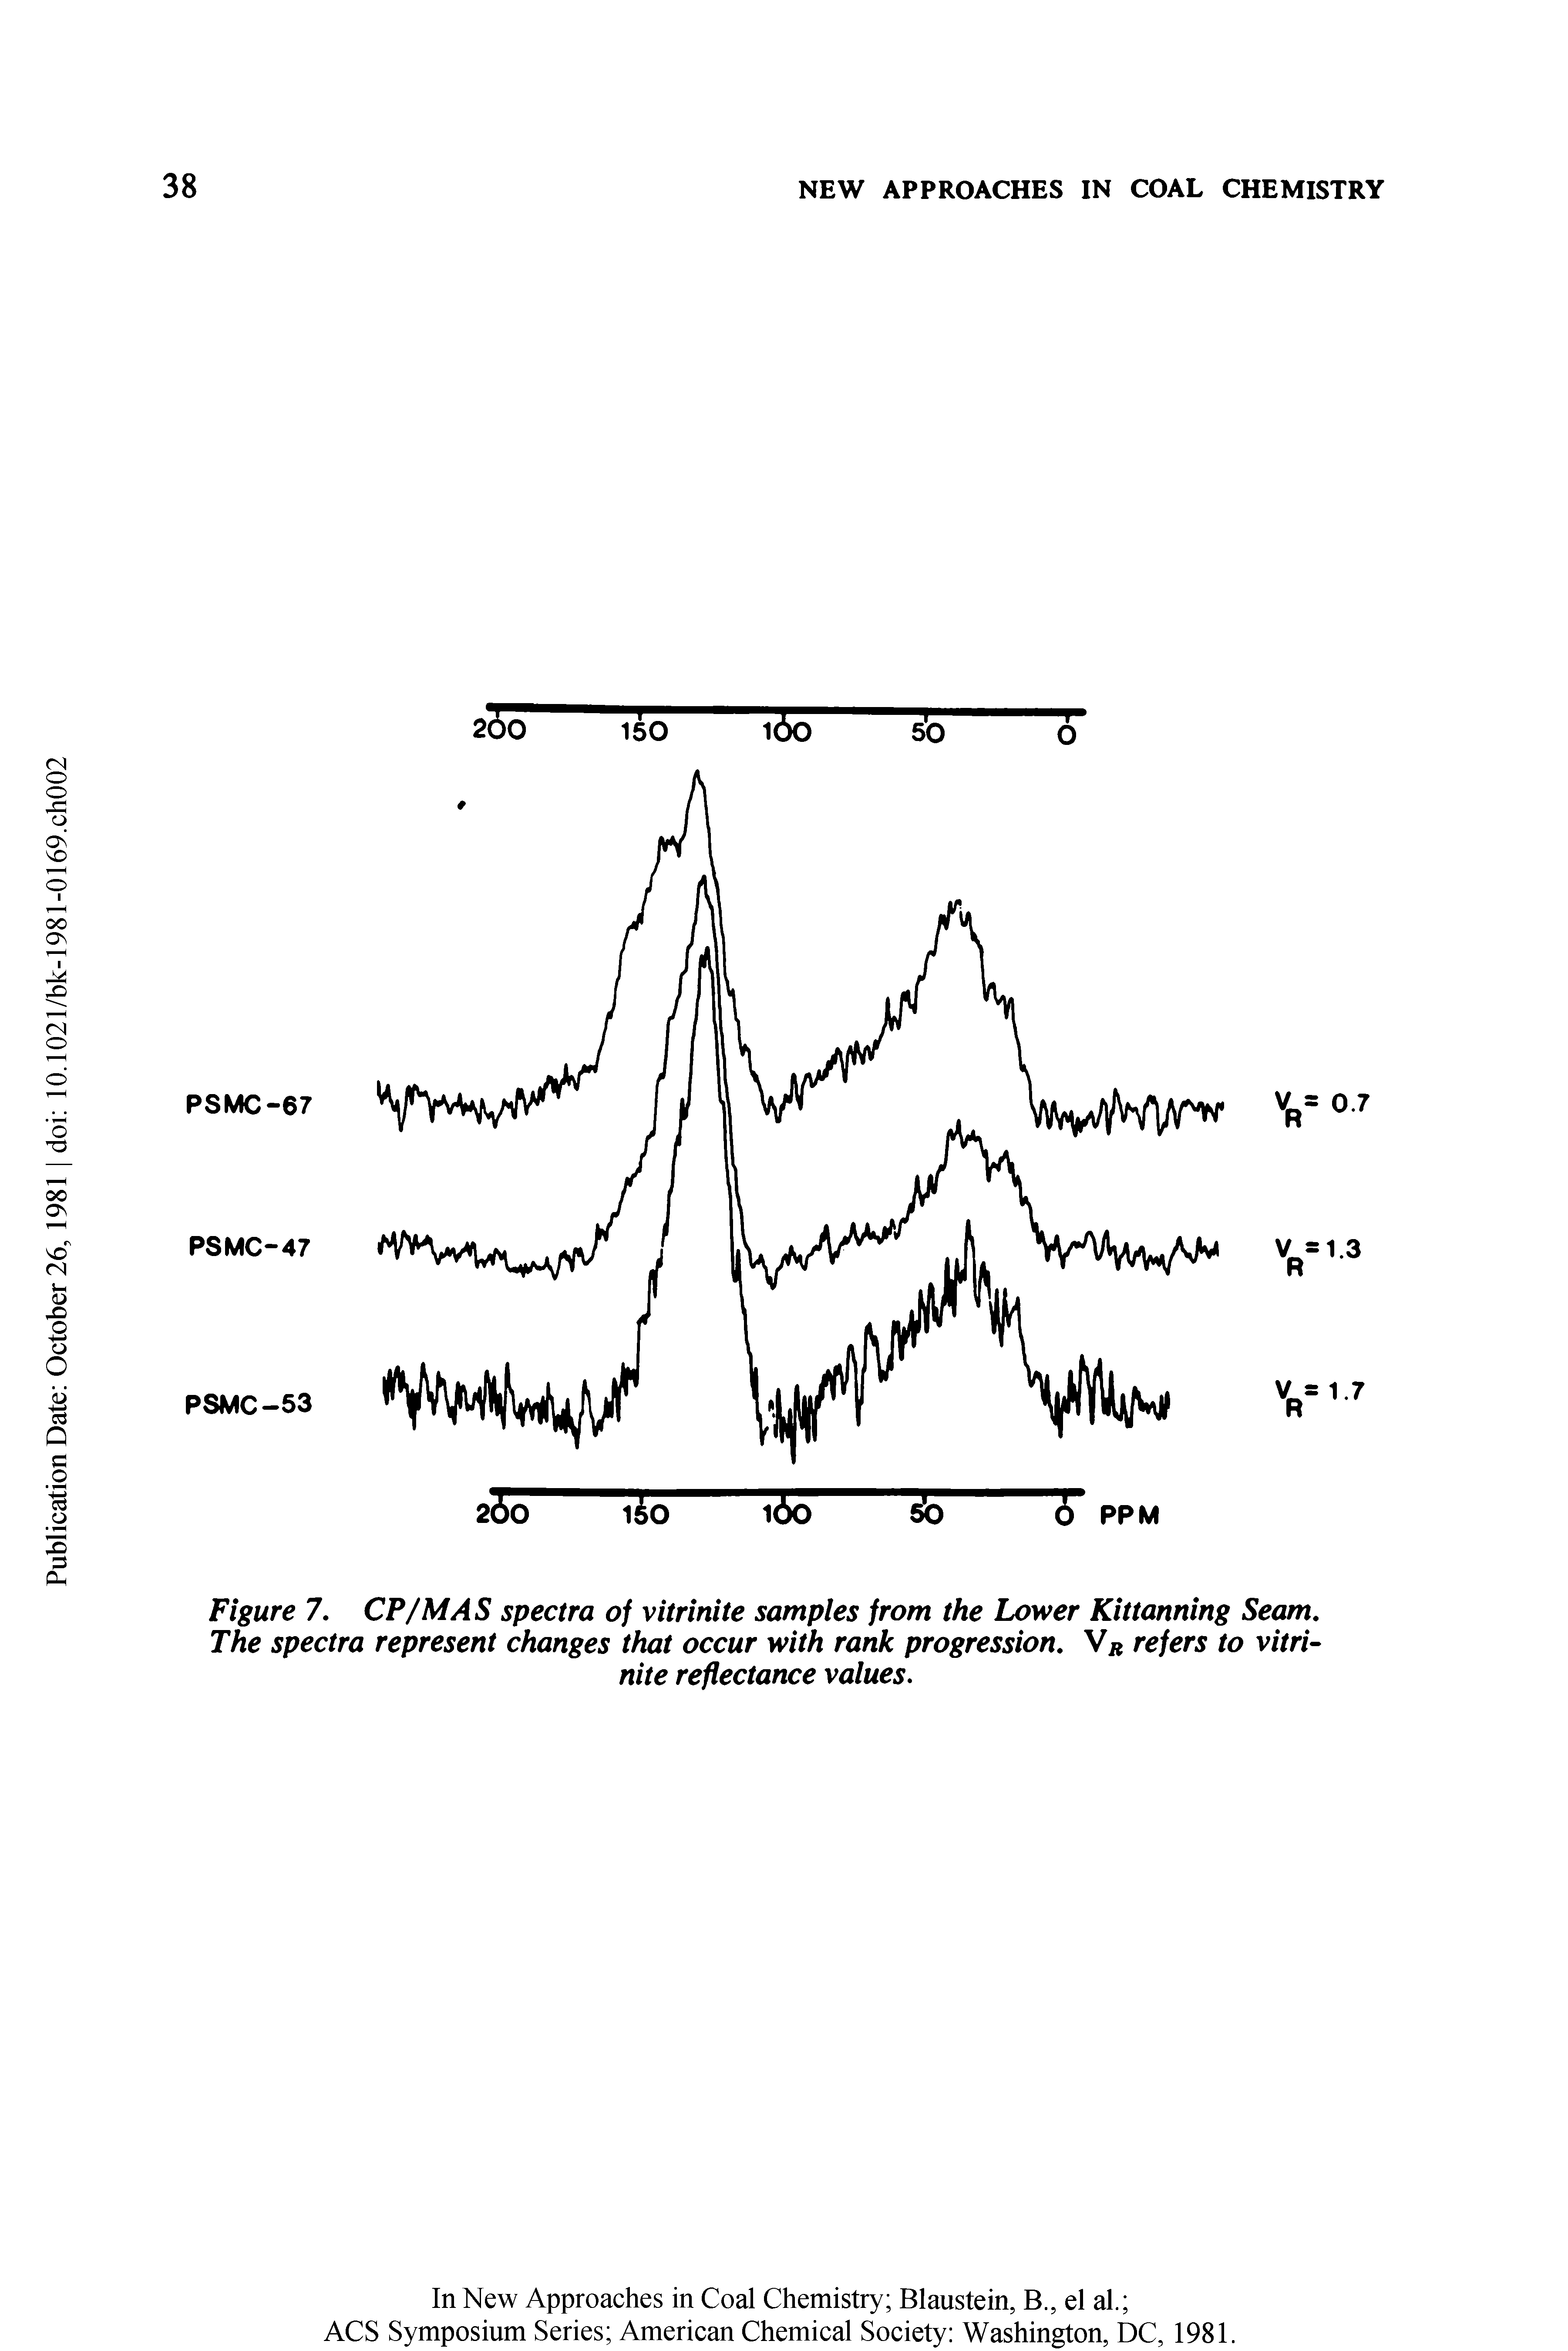 Figure 7. CP /MAS spectra of vitrinite samples from the Lower Kittanning Seam. The spectra represent changes that occur with rank progression. V refers to vitrinite reflectance values.